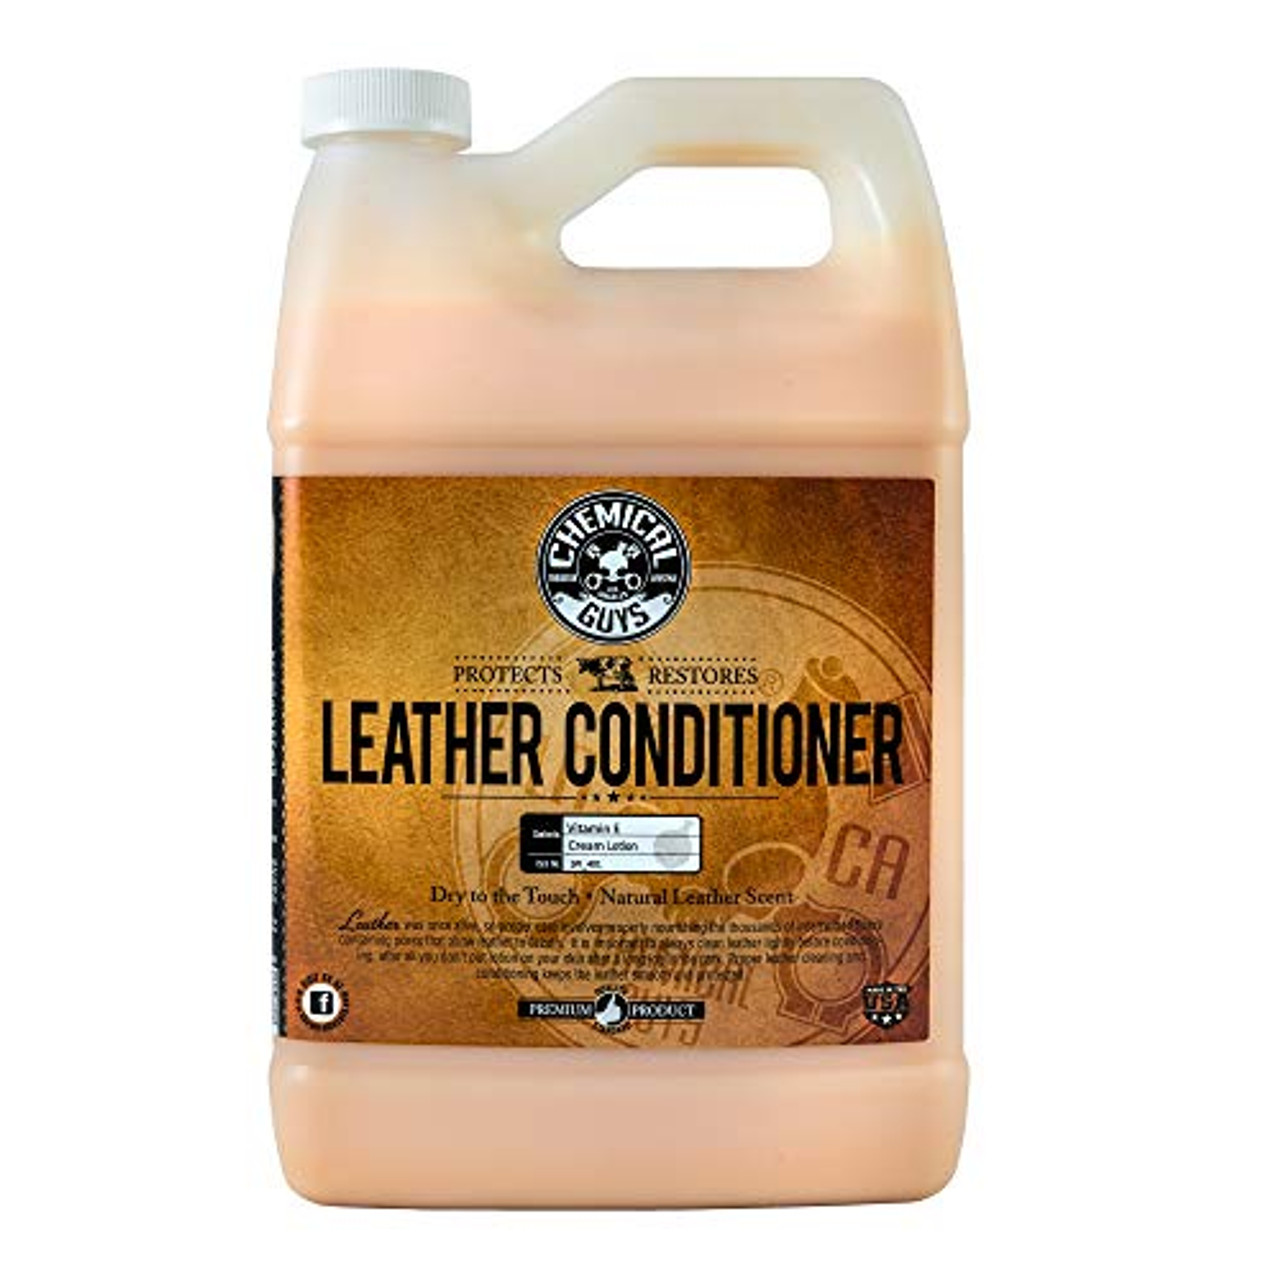 Chemical Guys Leather Cleaner, Colorless, Odorless - 16 fl oz